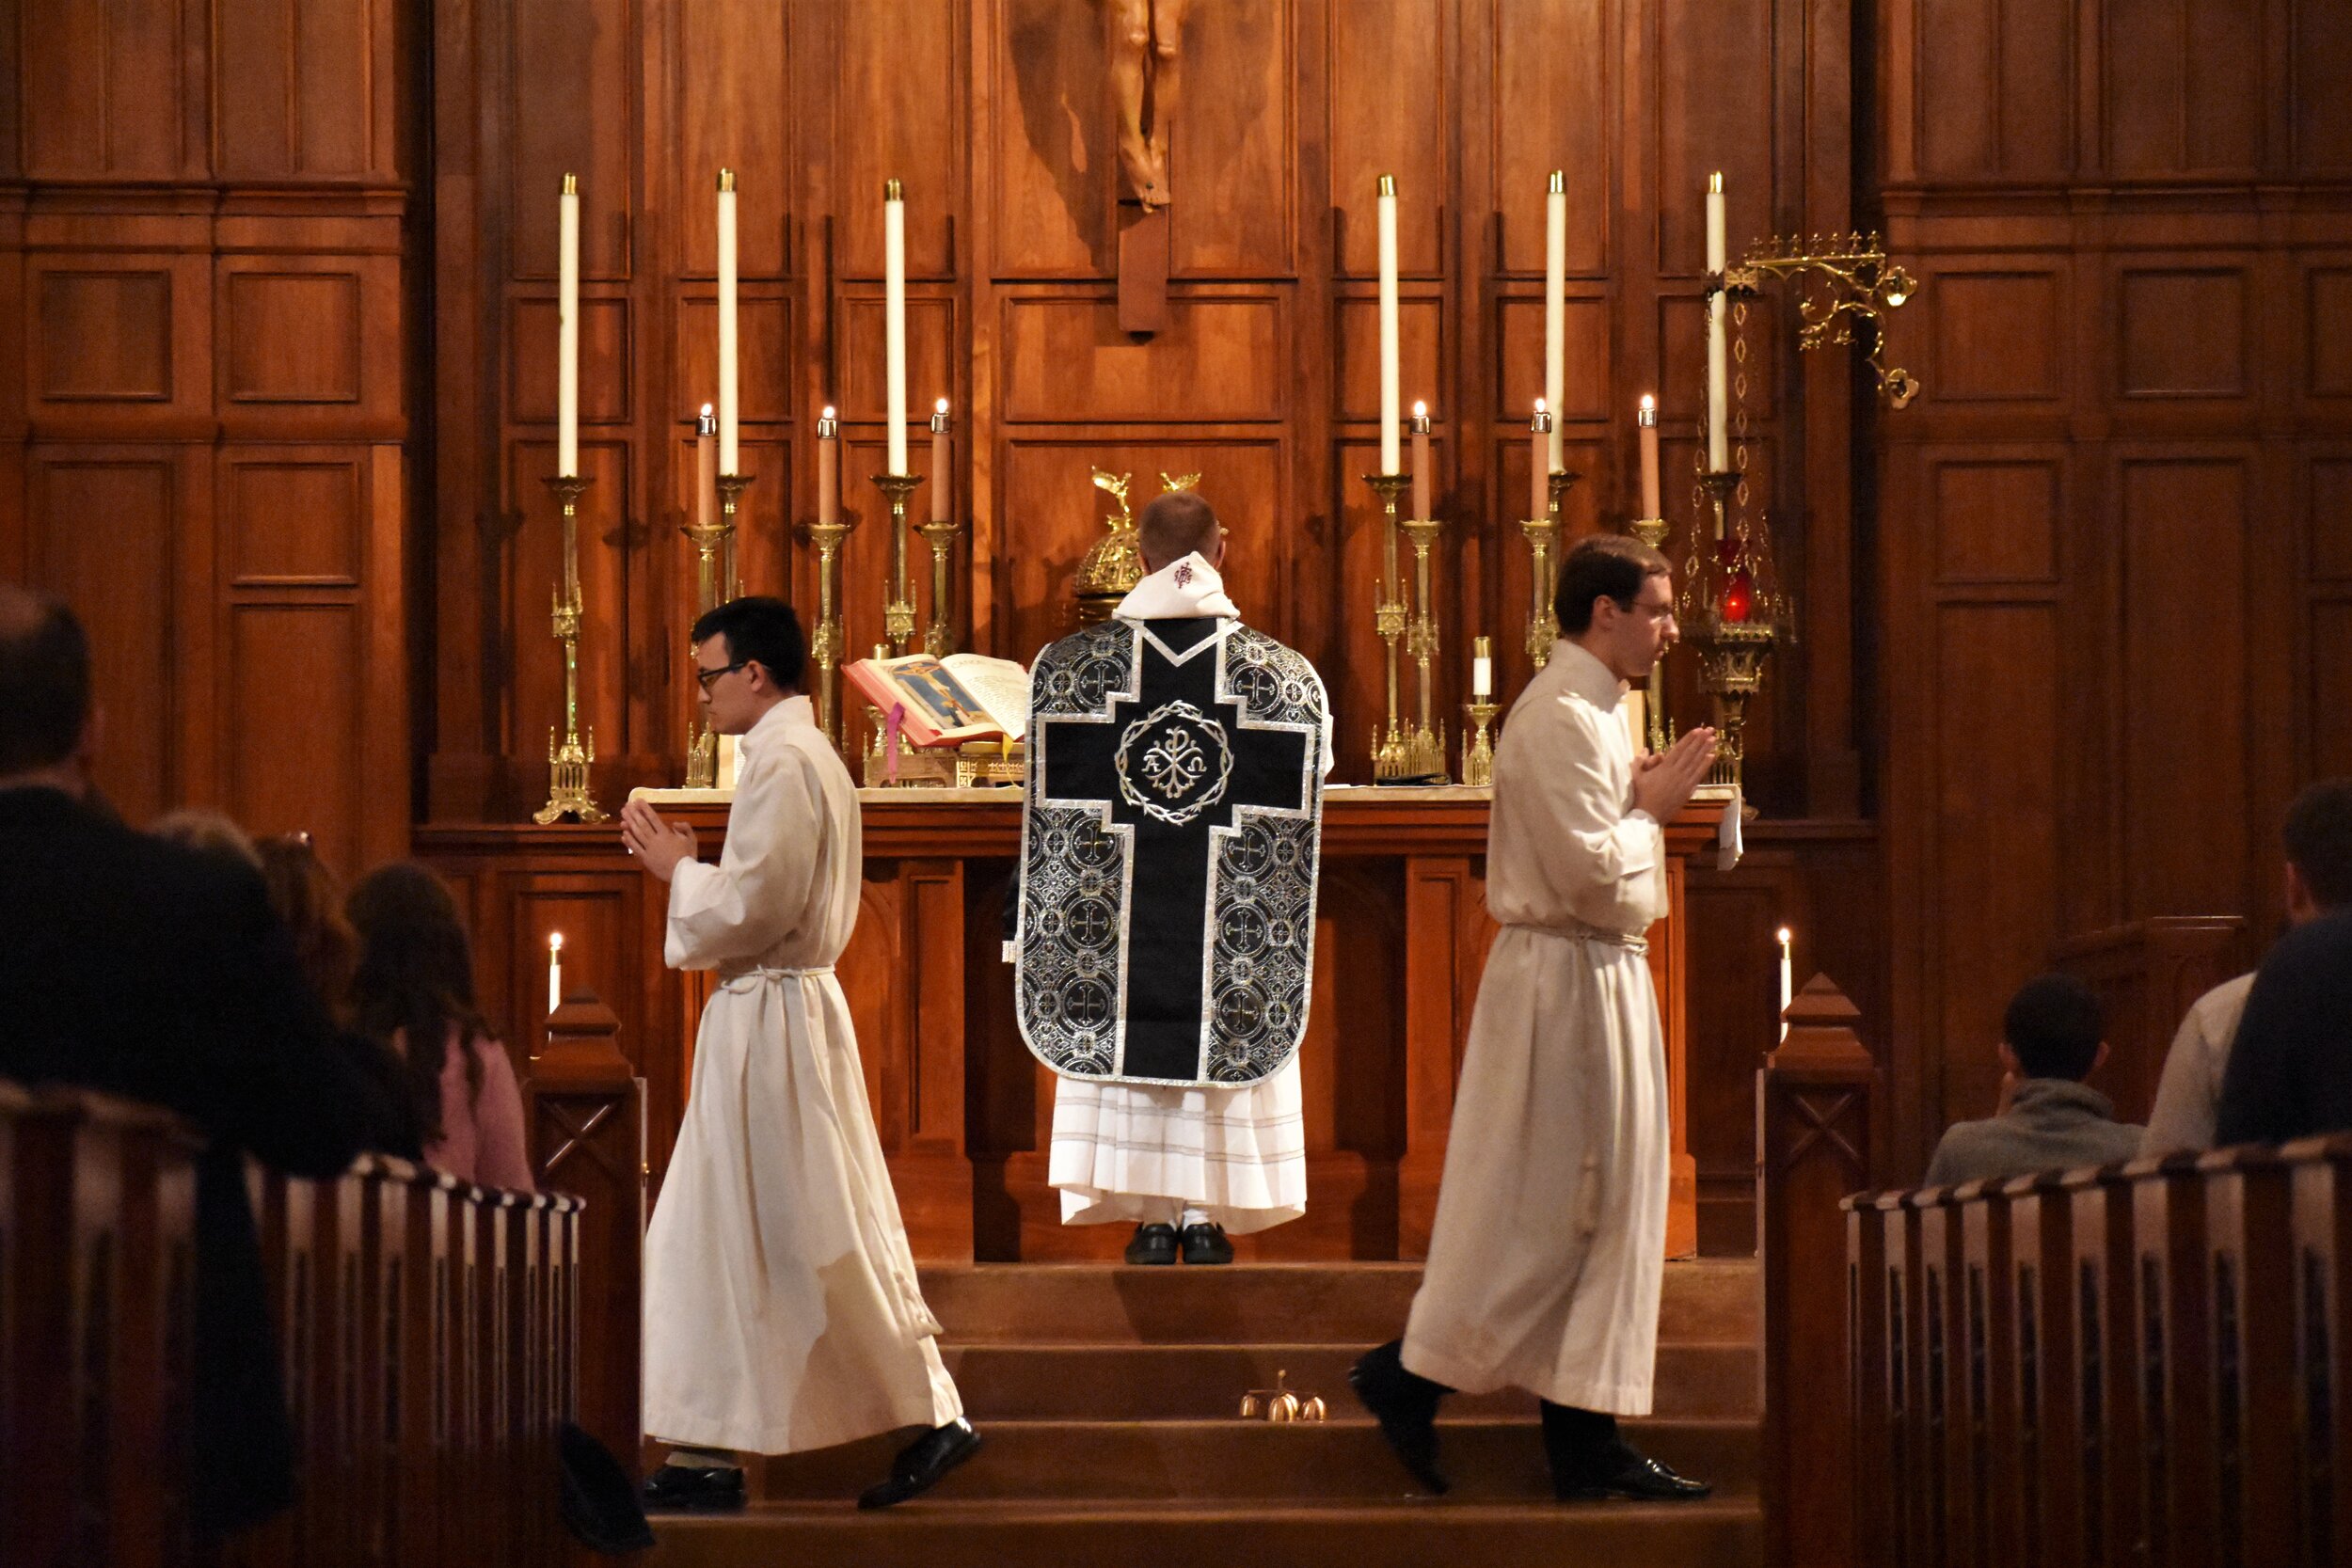 Dominican All Souls (Mass in the Dominican Rite)